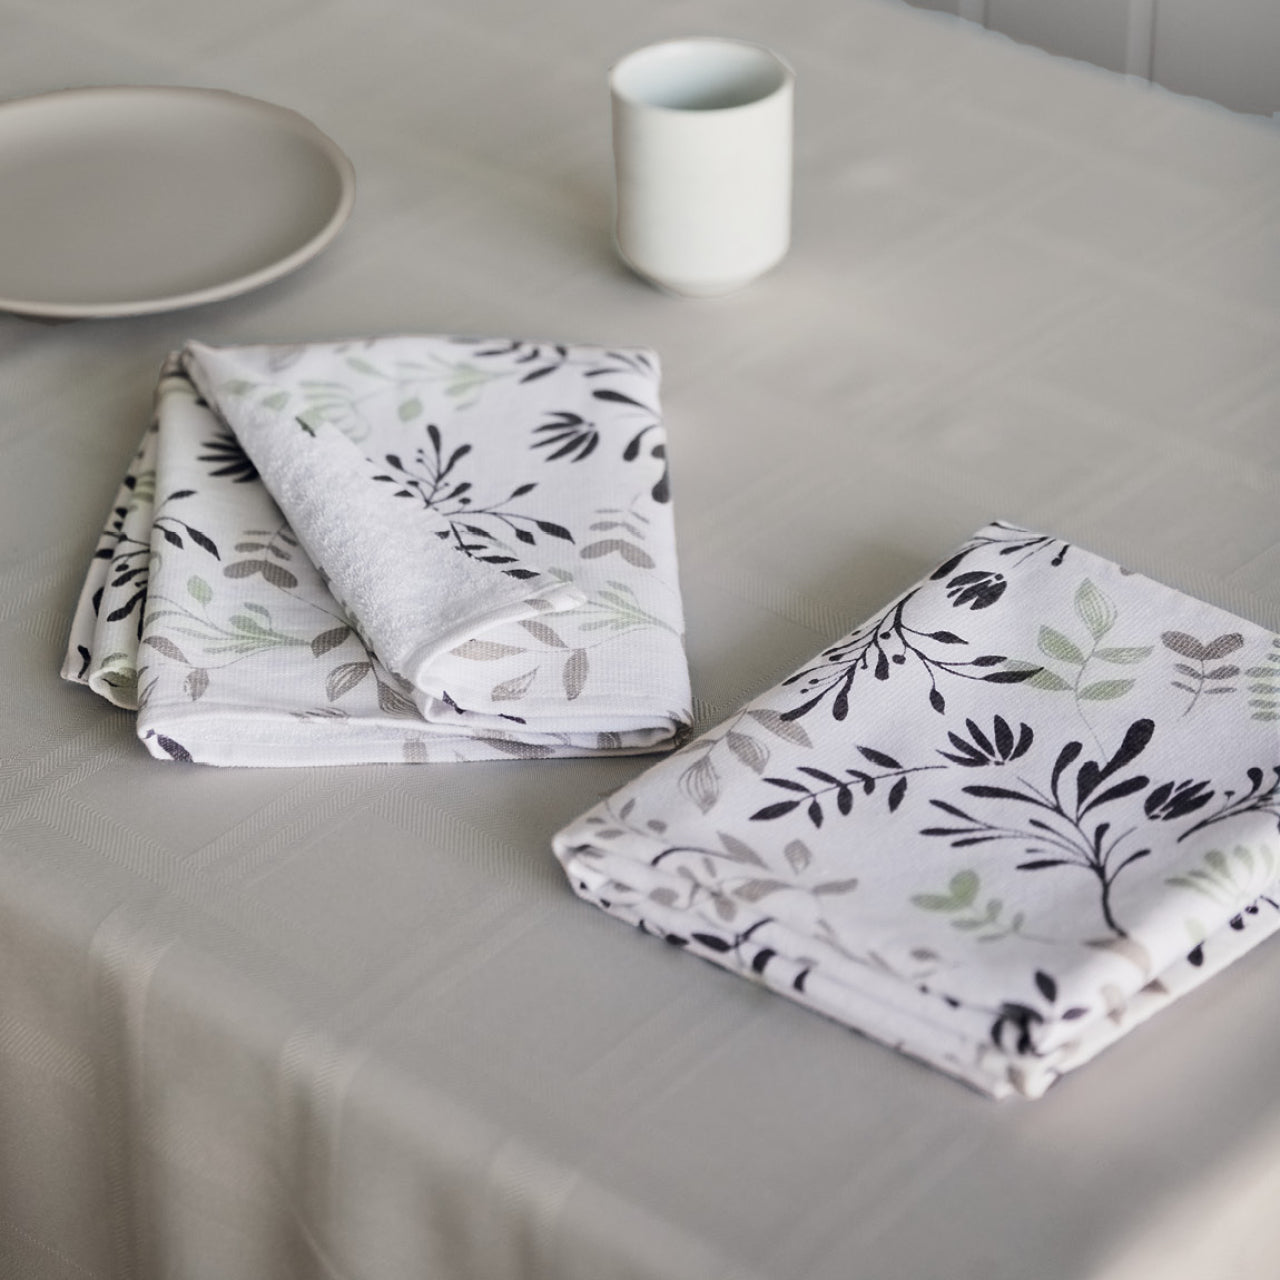 Lifestyle shot of Ambrosia Tea Towels on dining table with plate and glass